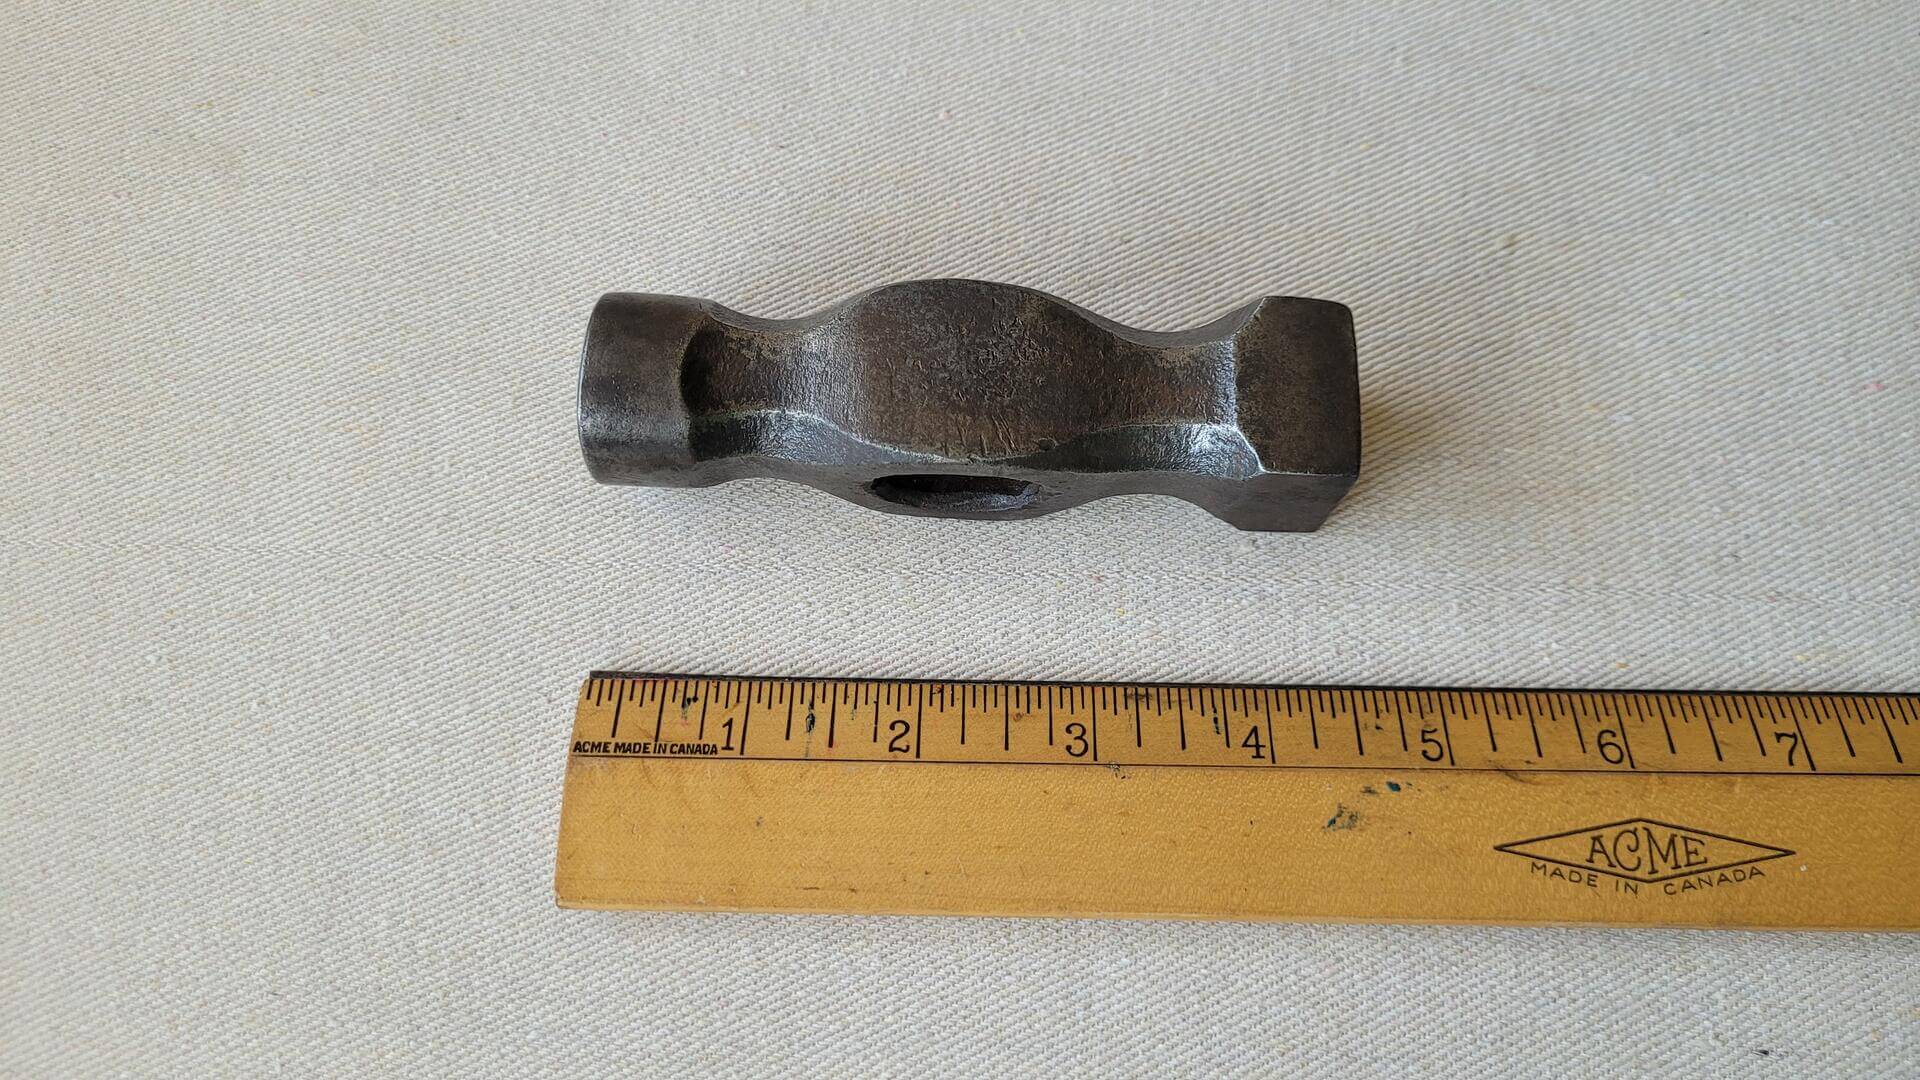 Vintage panel beating hammer head w square face 4 1/2" long. Antique collectible automotive & metalwork planishing mallet shaping forming striking tool